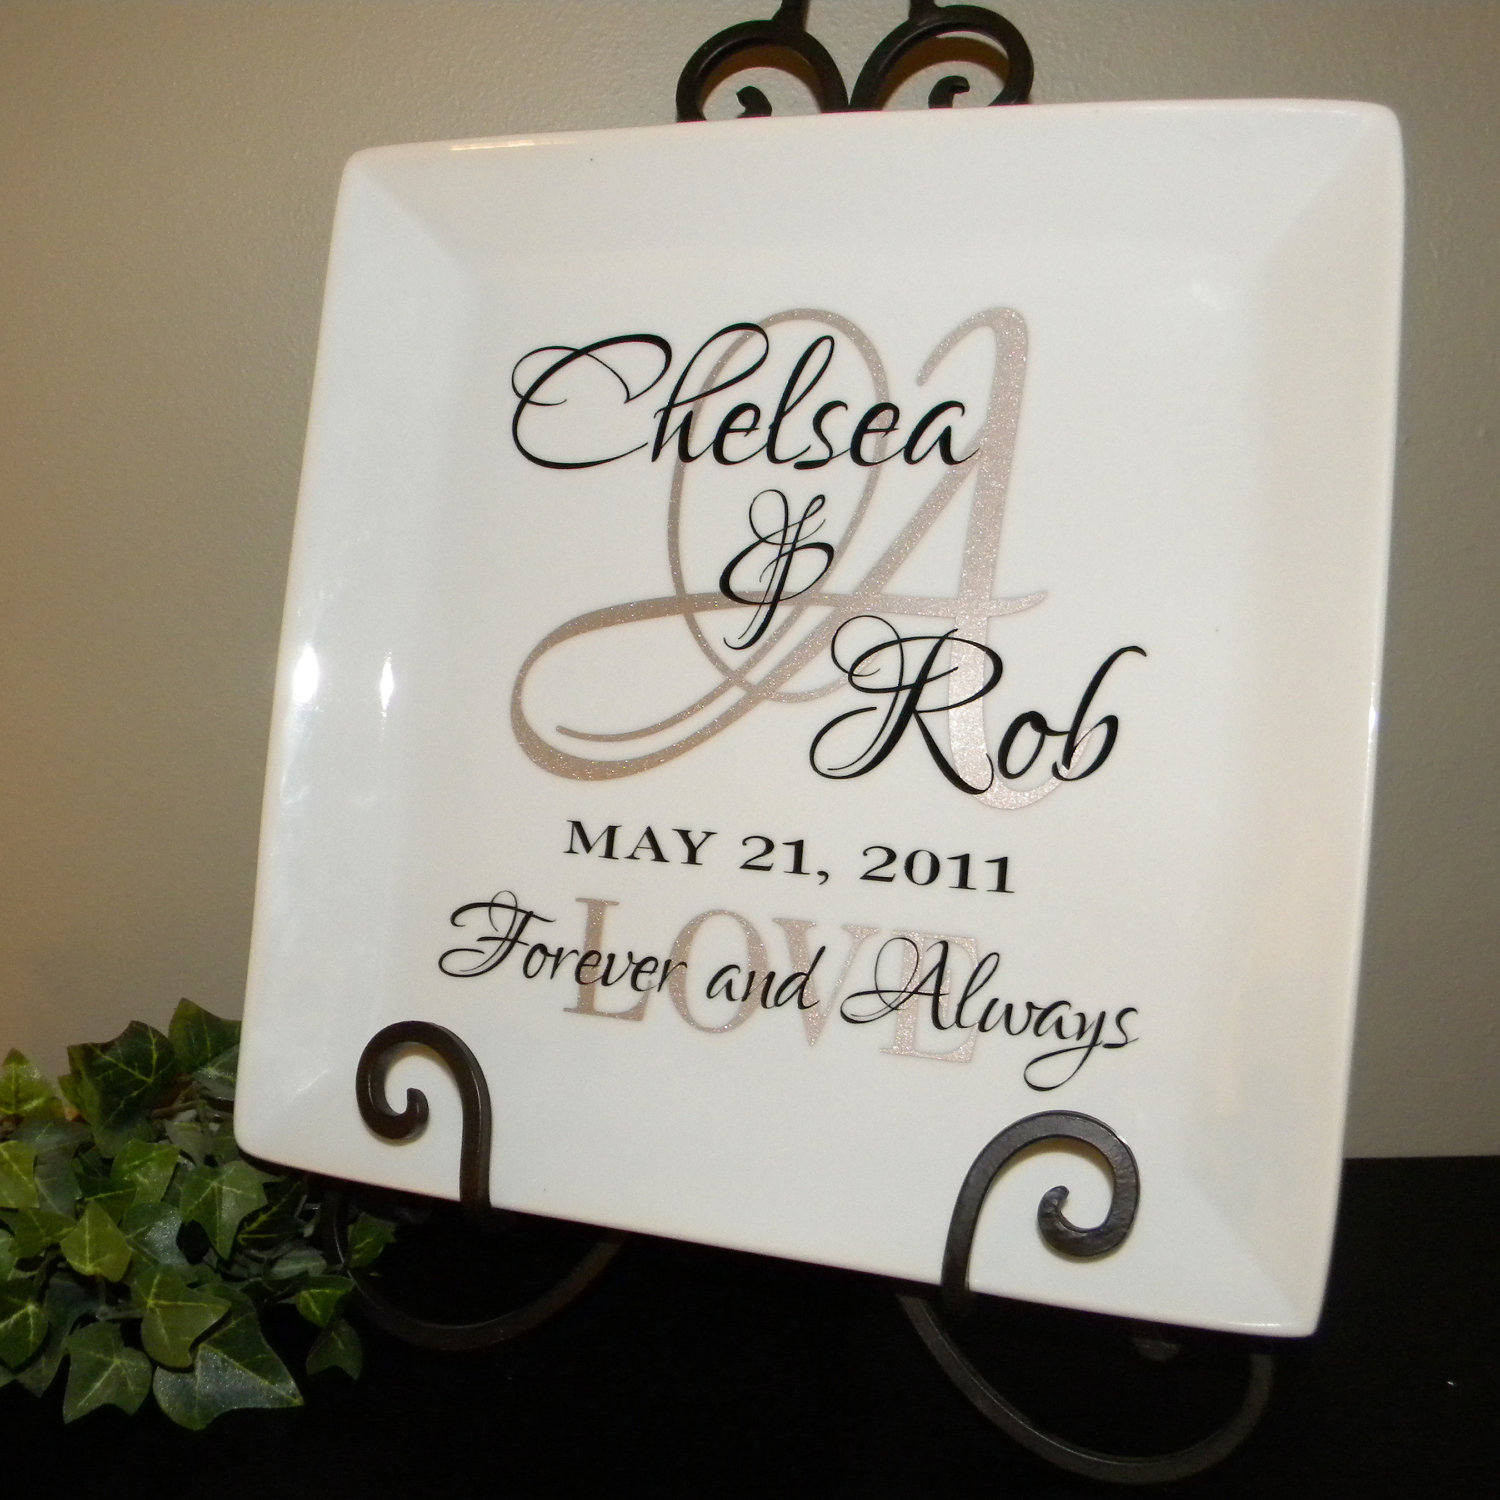 Couples Wedding Shower Gift Ideas
 Personalized Wedding Gift Plate Anniversary Gift For Couple